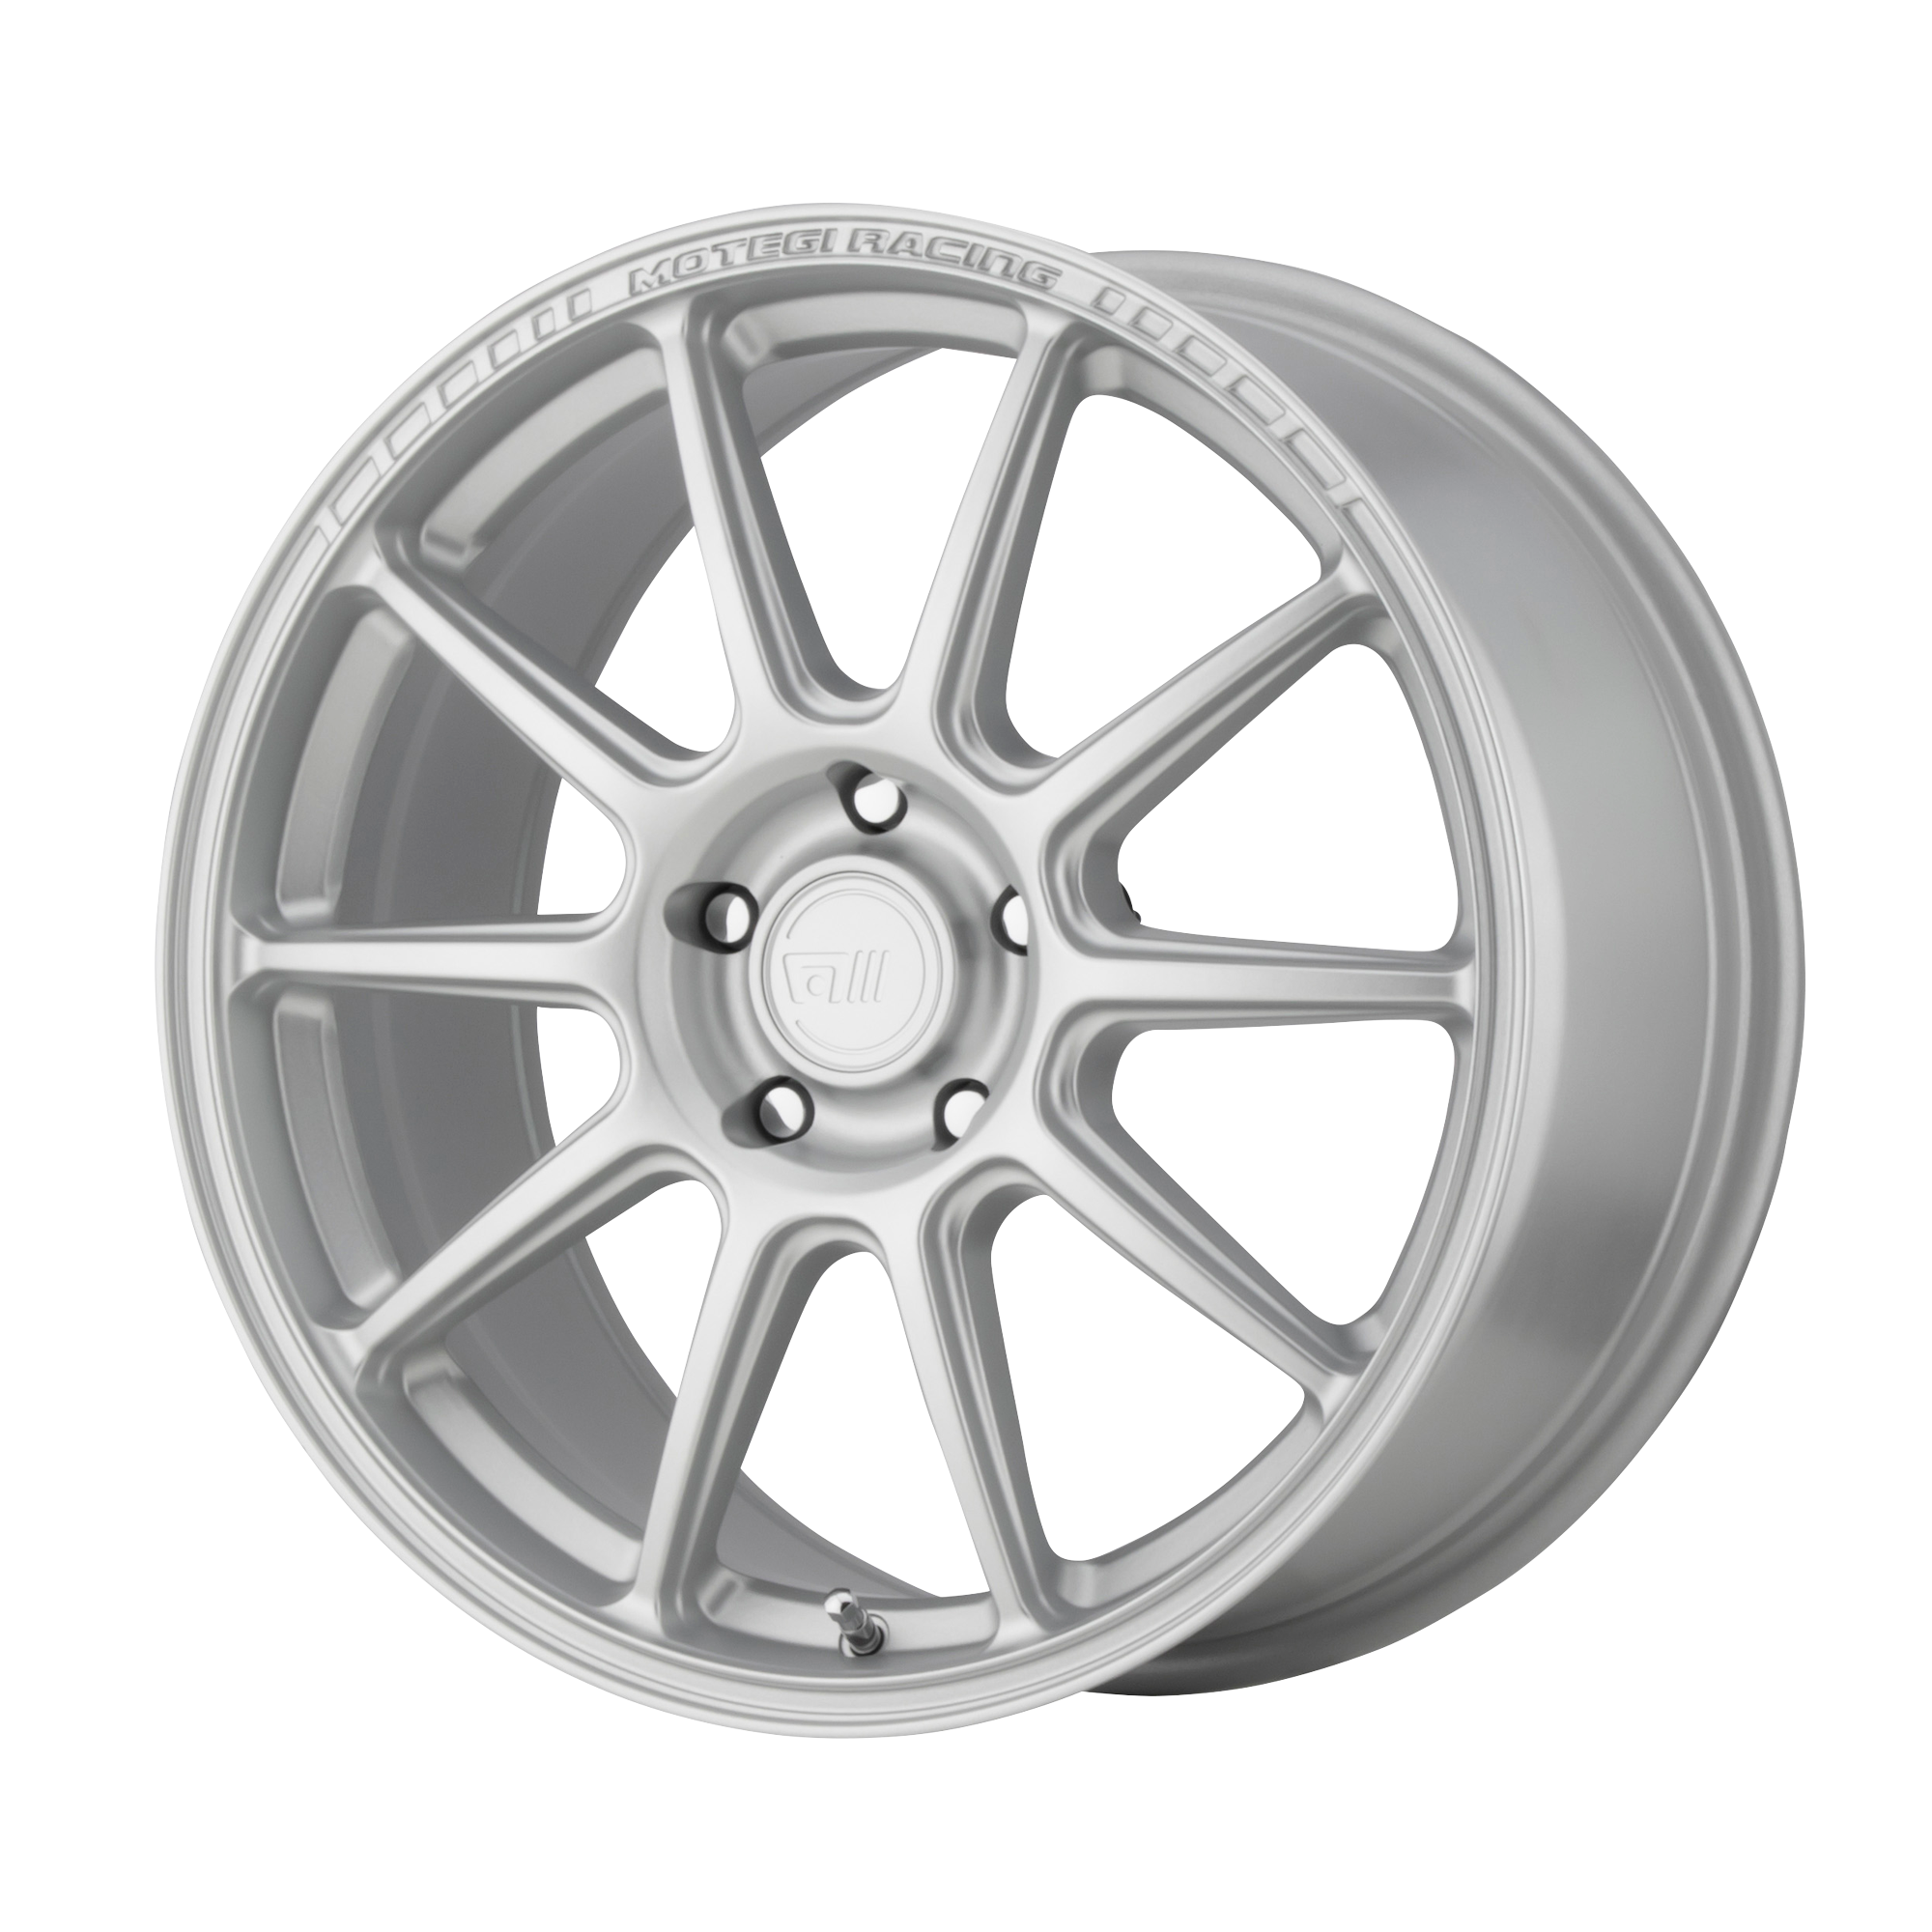 MR140 17x7 5x114.30 HYPER SILVER (38 mm) - Tires and Engine Performance